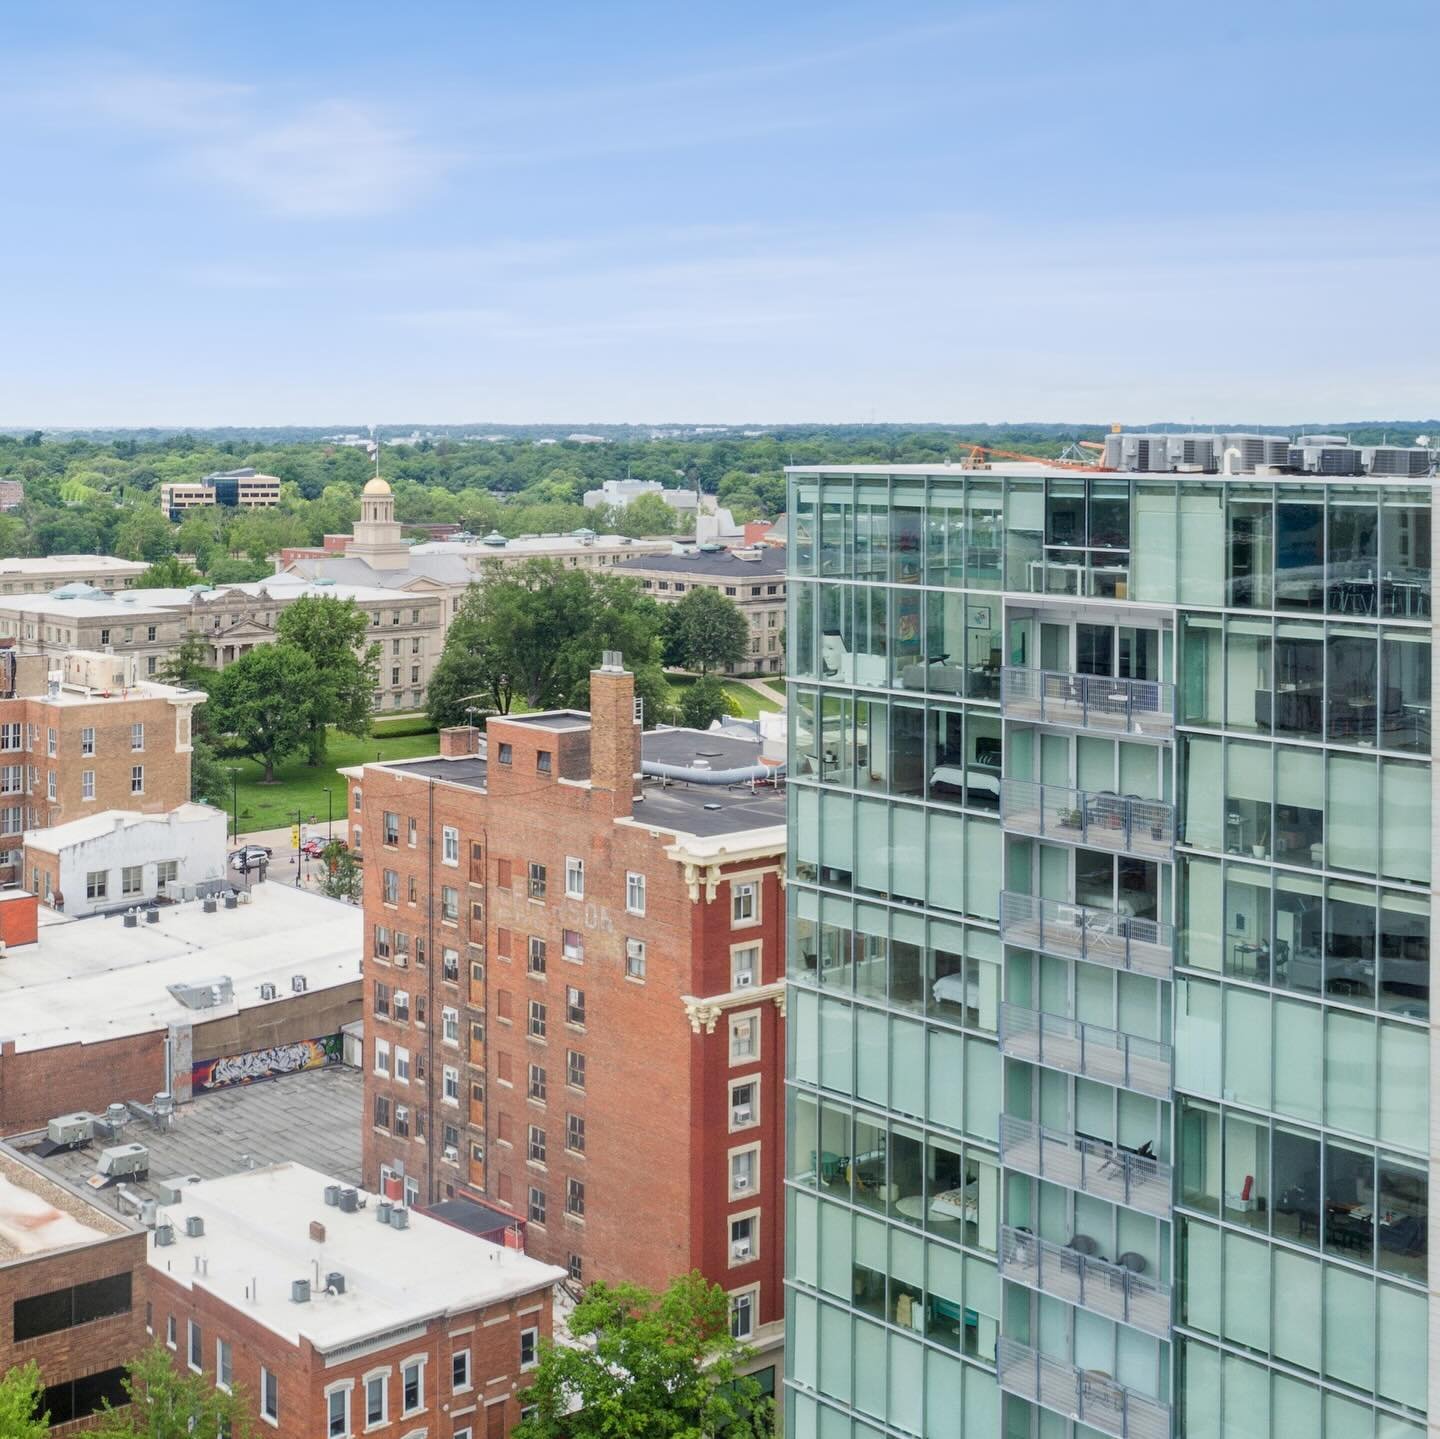 This contemporary 7th-floor condo in Park@201 offers a modern living experience in the center of downtown Iowa City. The main living area features an open floor plan and floor-to-ceiling windows, providing stunning views of the historic Hotel Jeffers